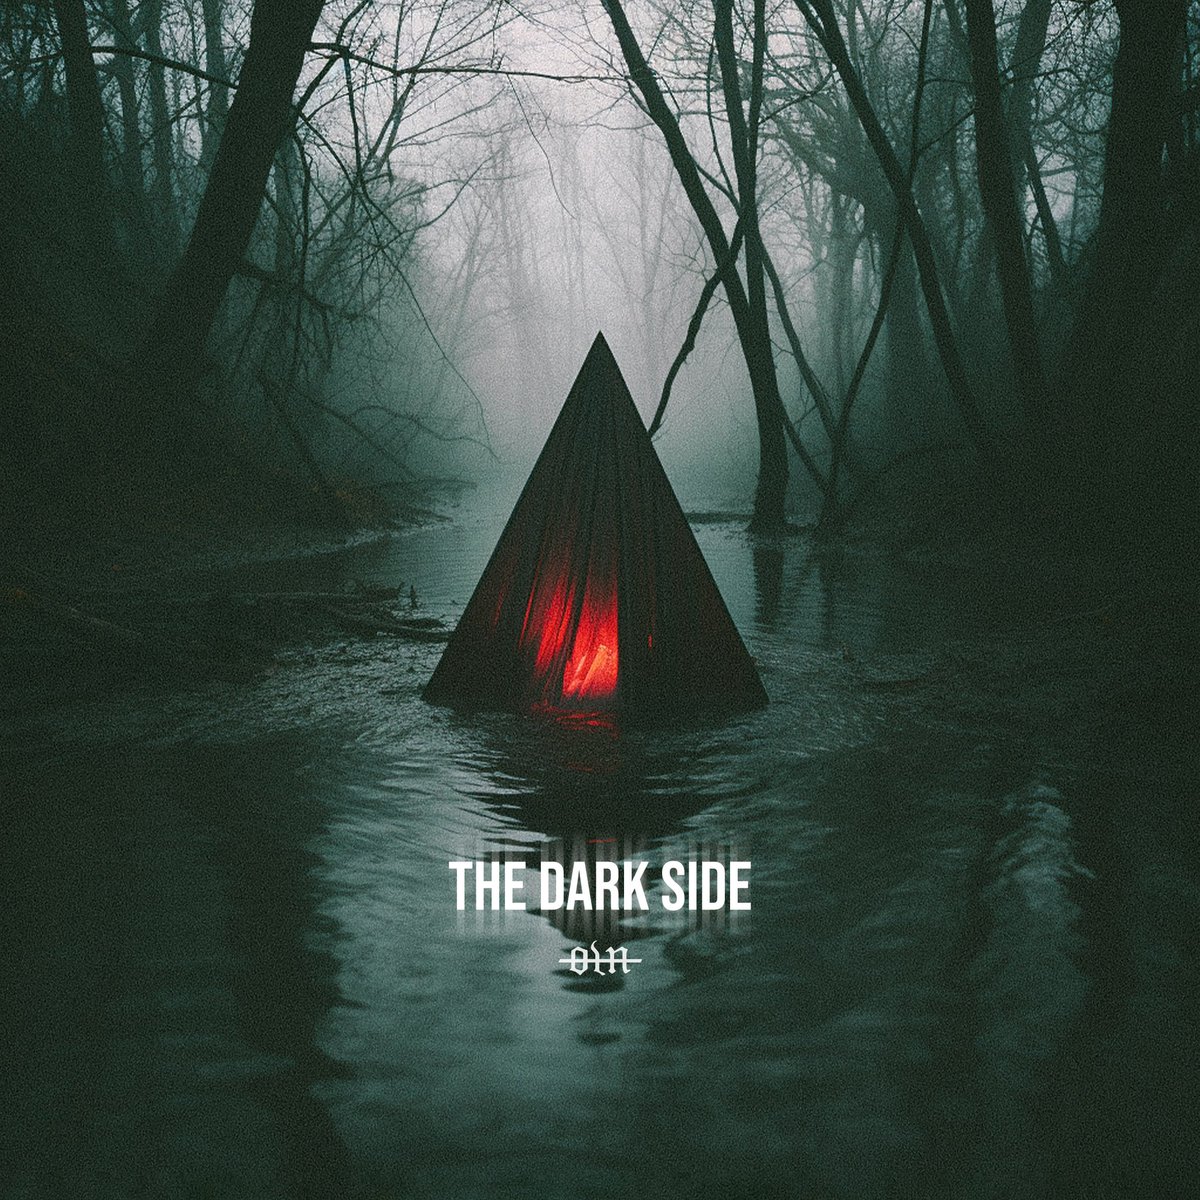 Let us know if you hear our new song ‘The Dark Side’ on @SXMOctane 🤘🏻